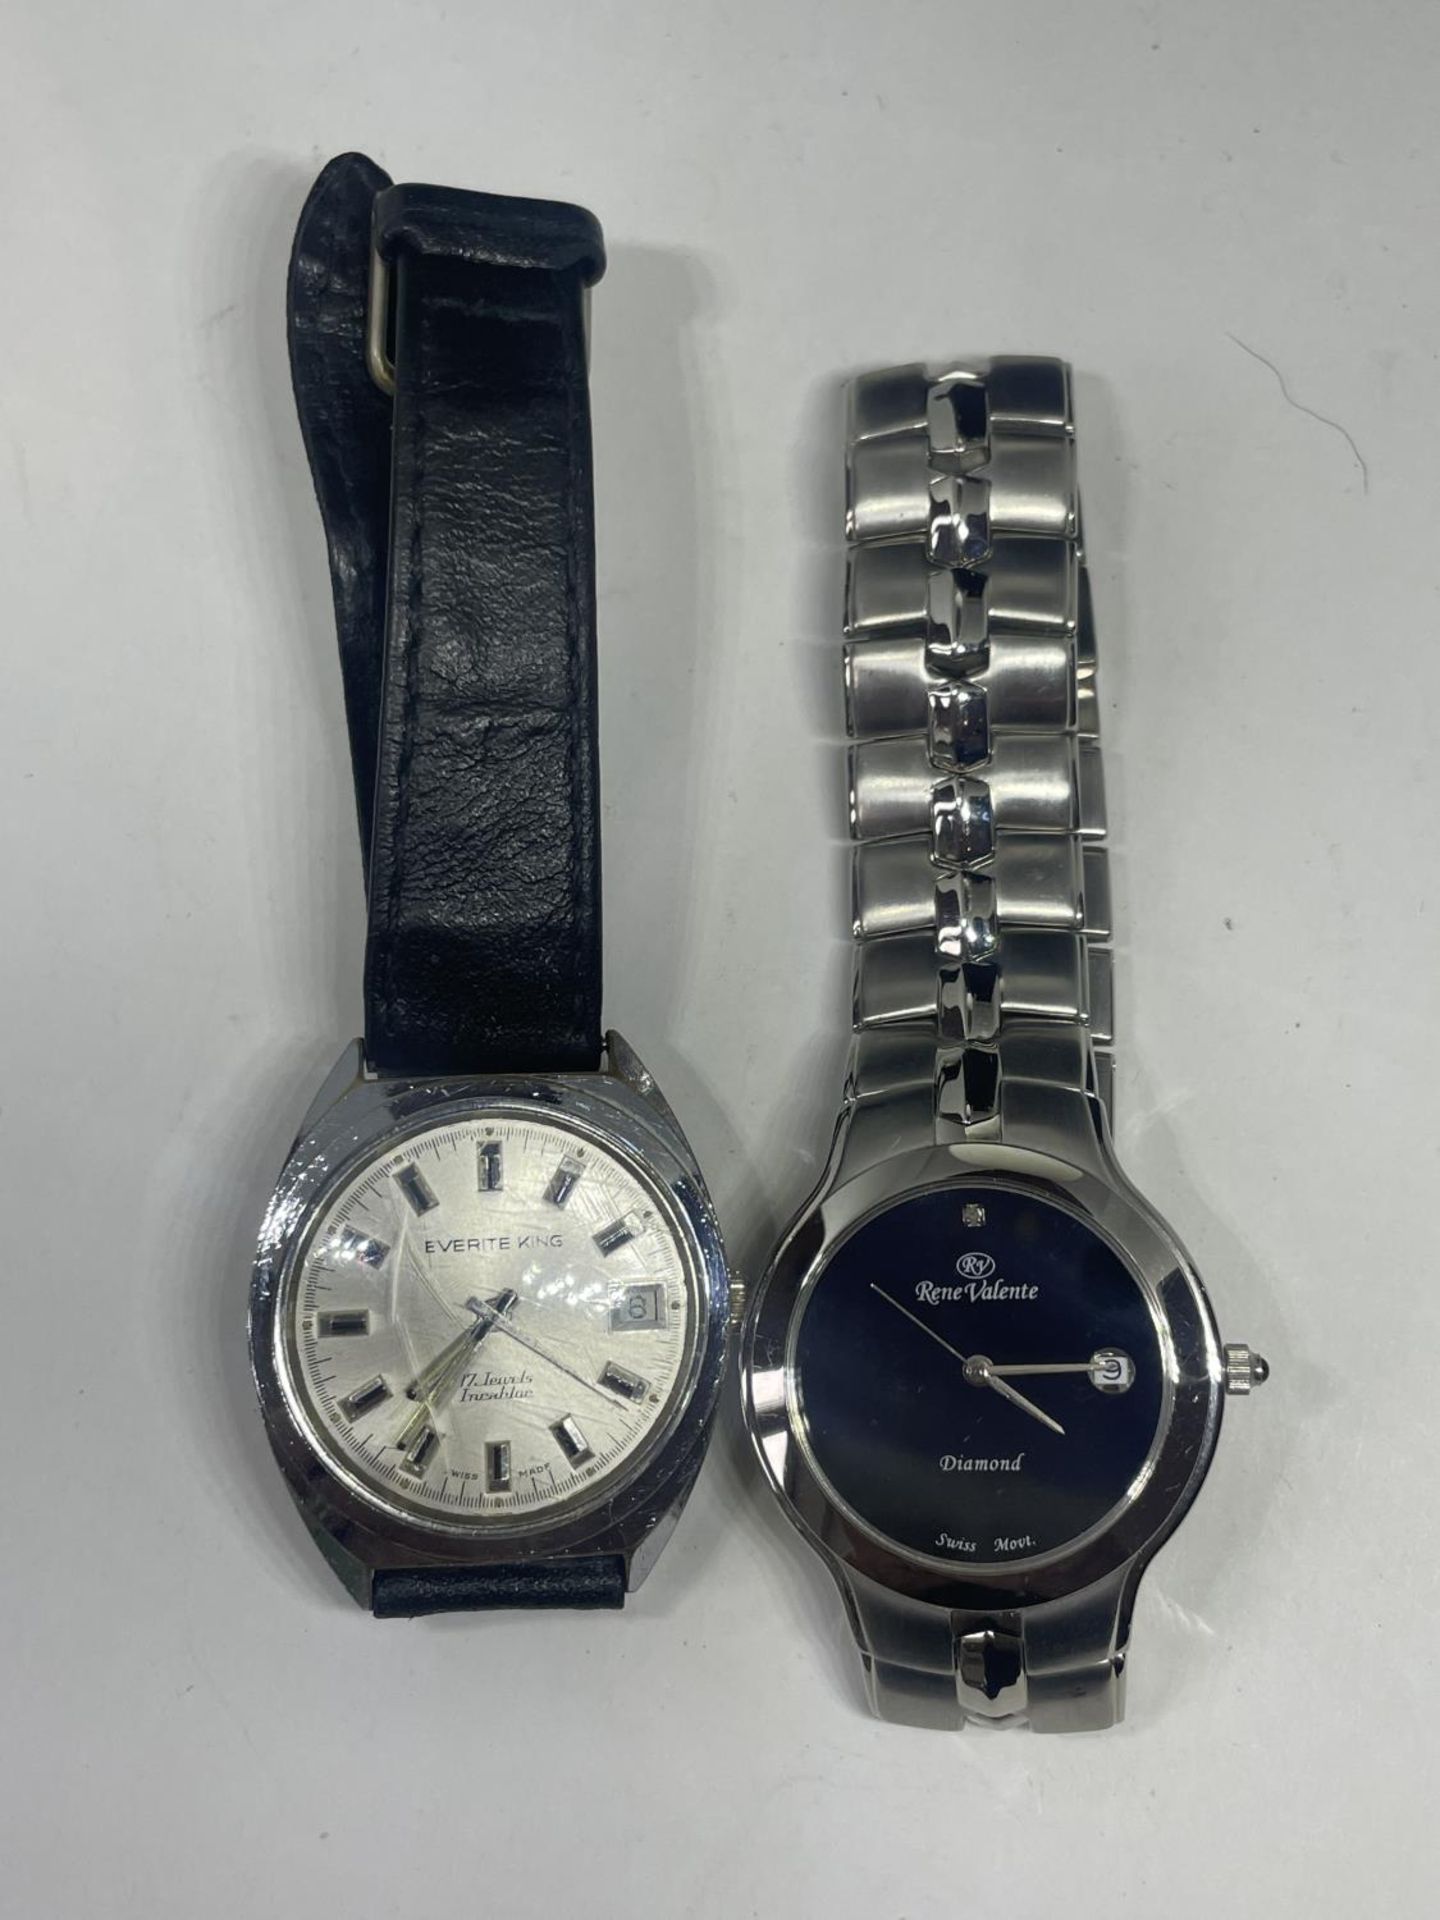 TWO WRIST WATCHES SEEN WORKING BUT NO WARRANTY